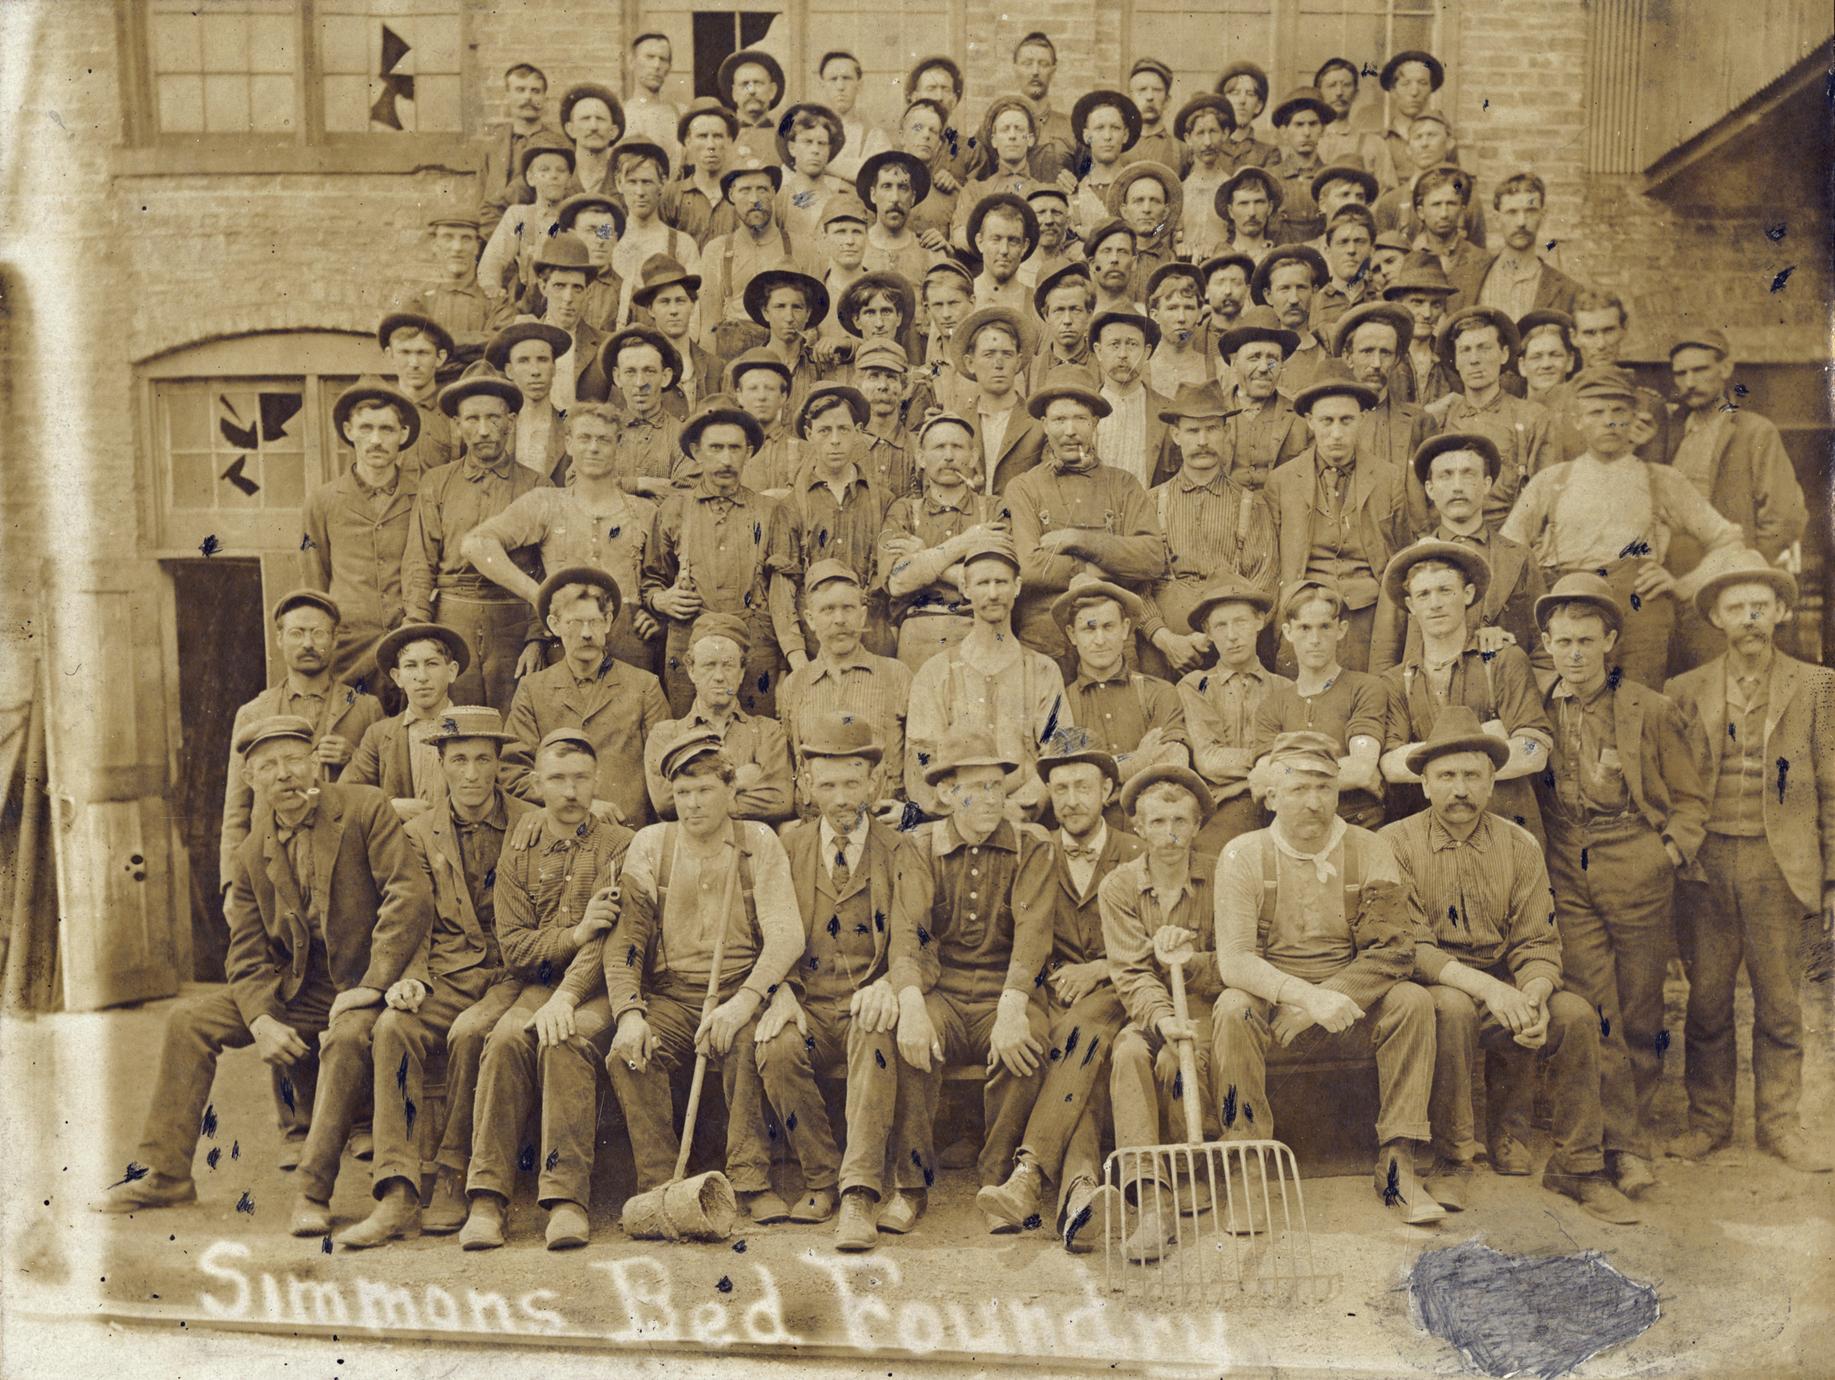 Simmons foundry employees